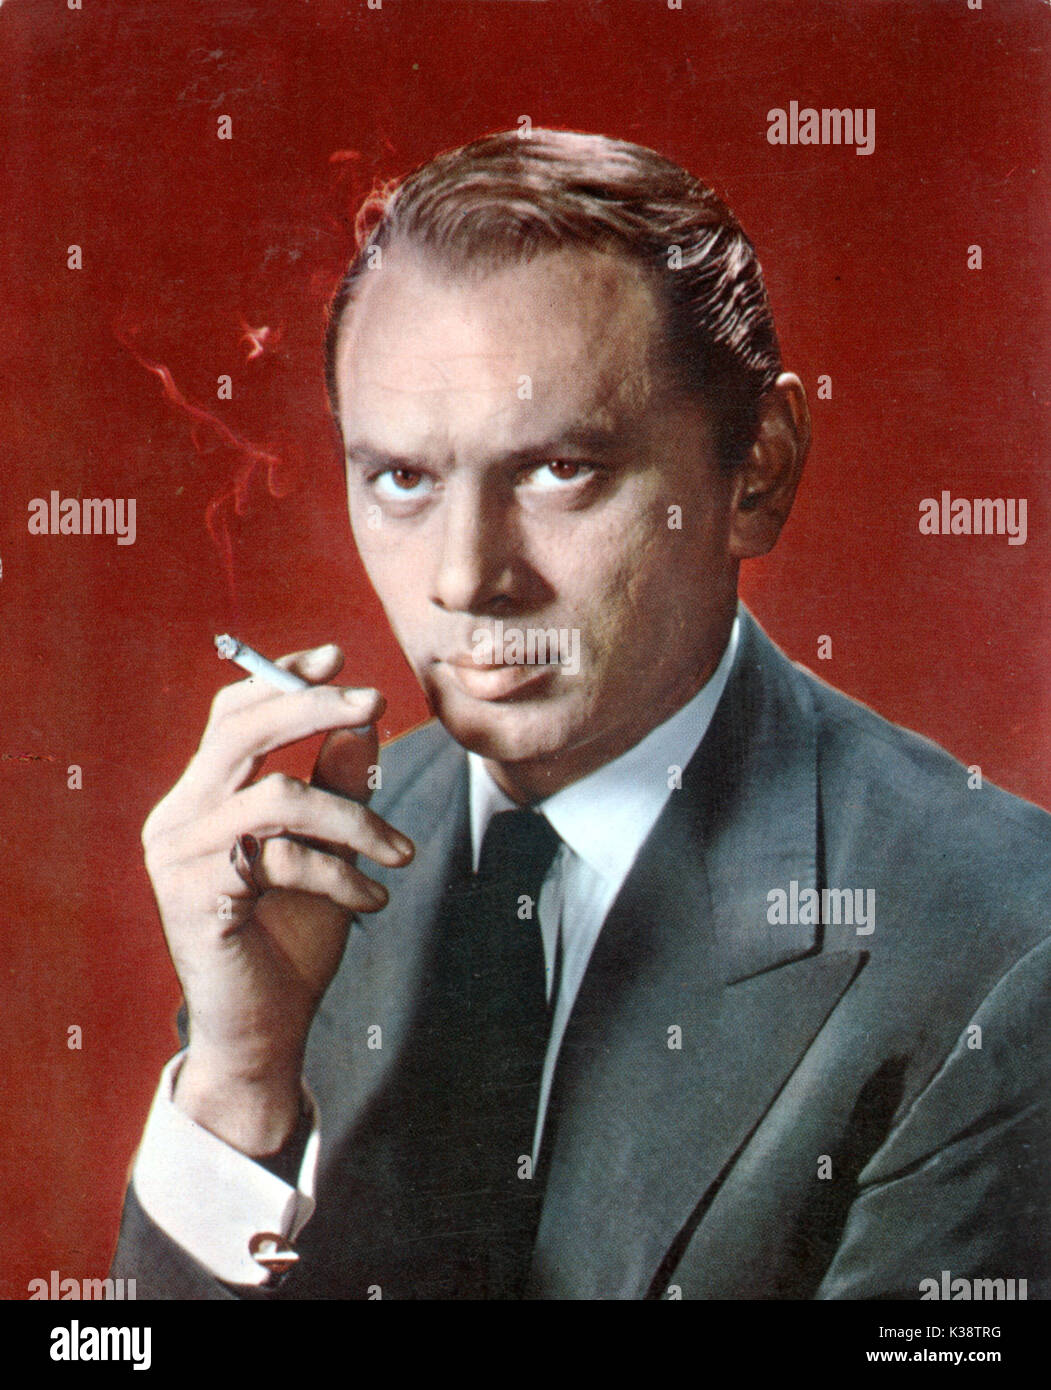 YUL BRYNNER Actor Stock Photo